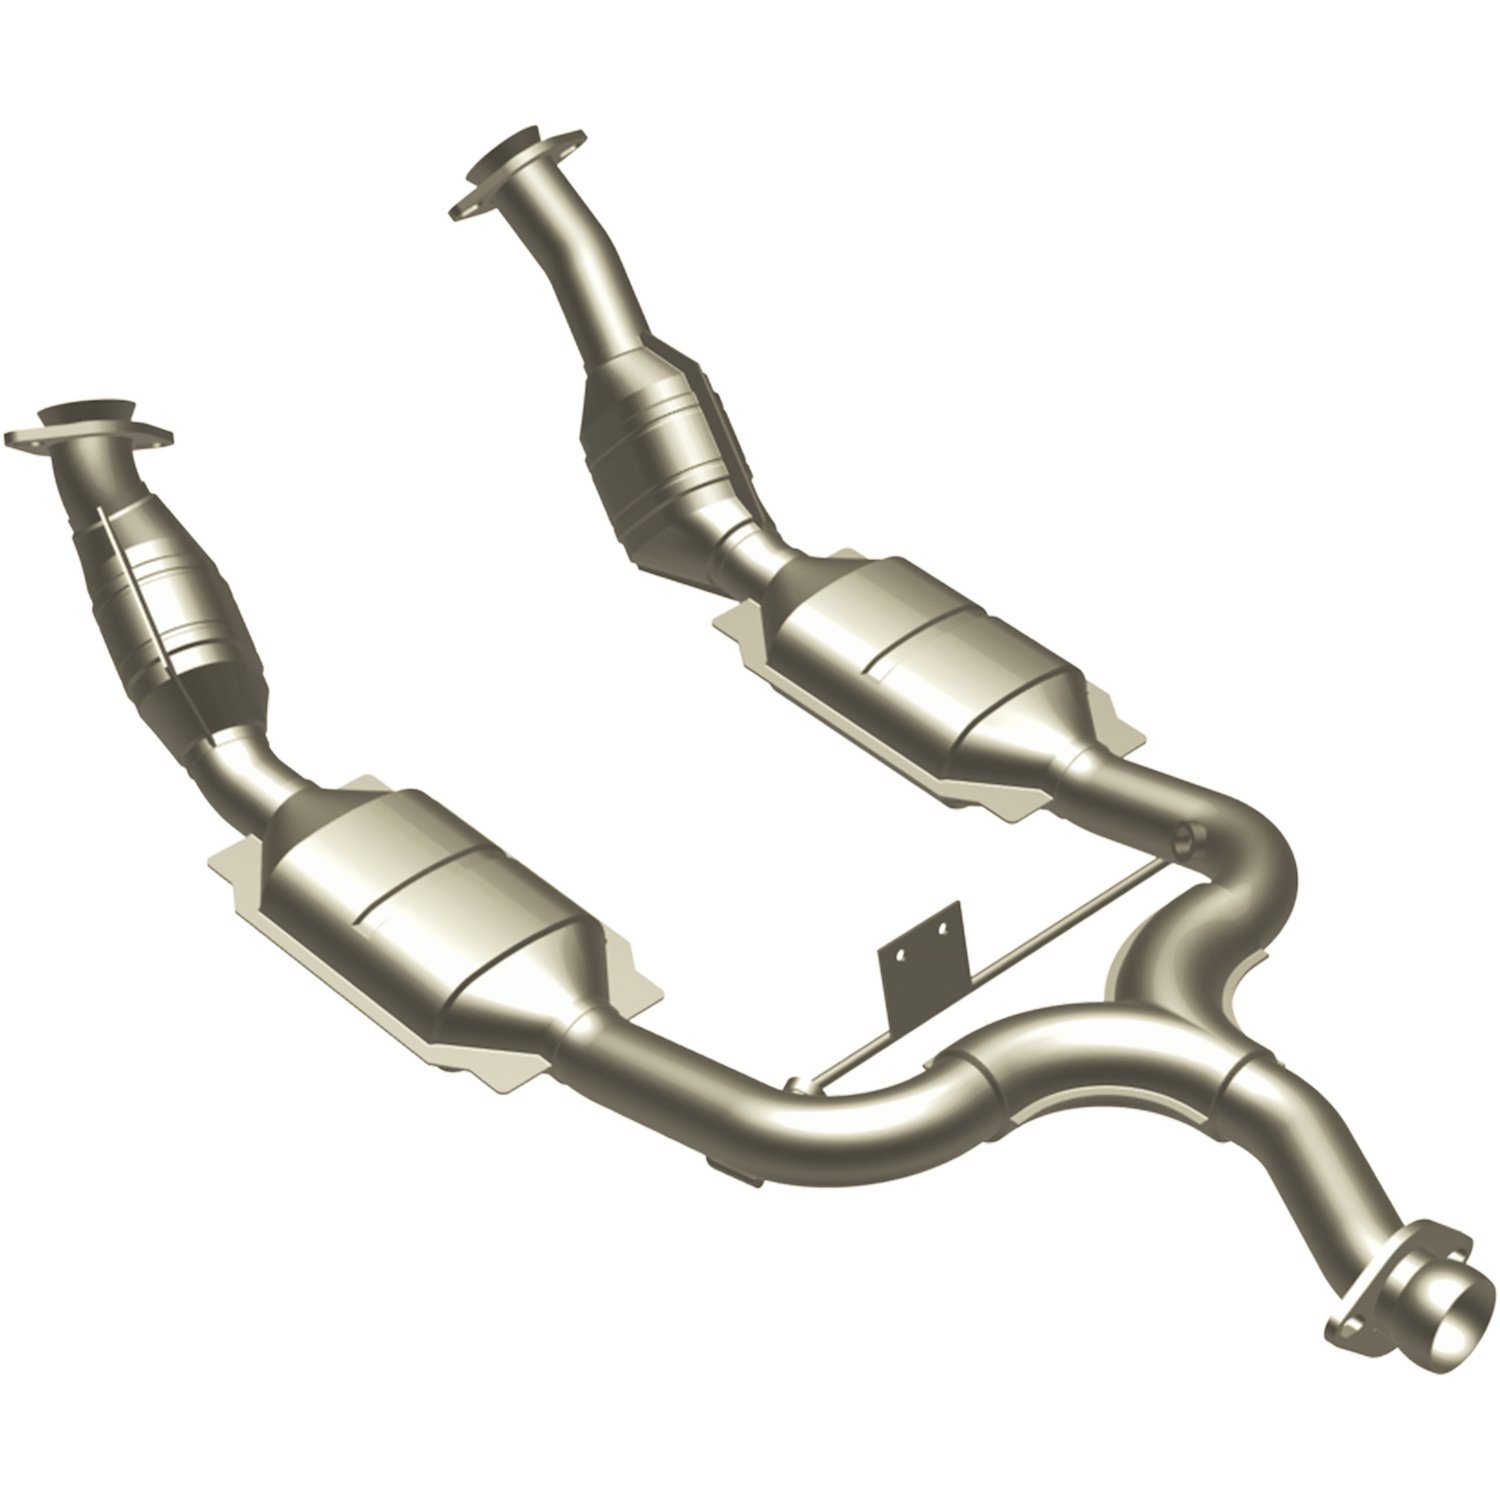 1994-1995 Ford Mustang California Grade CARB Compliant Direct-Fit Catalytic Converter